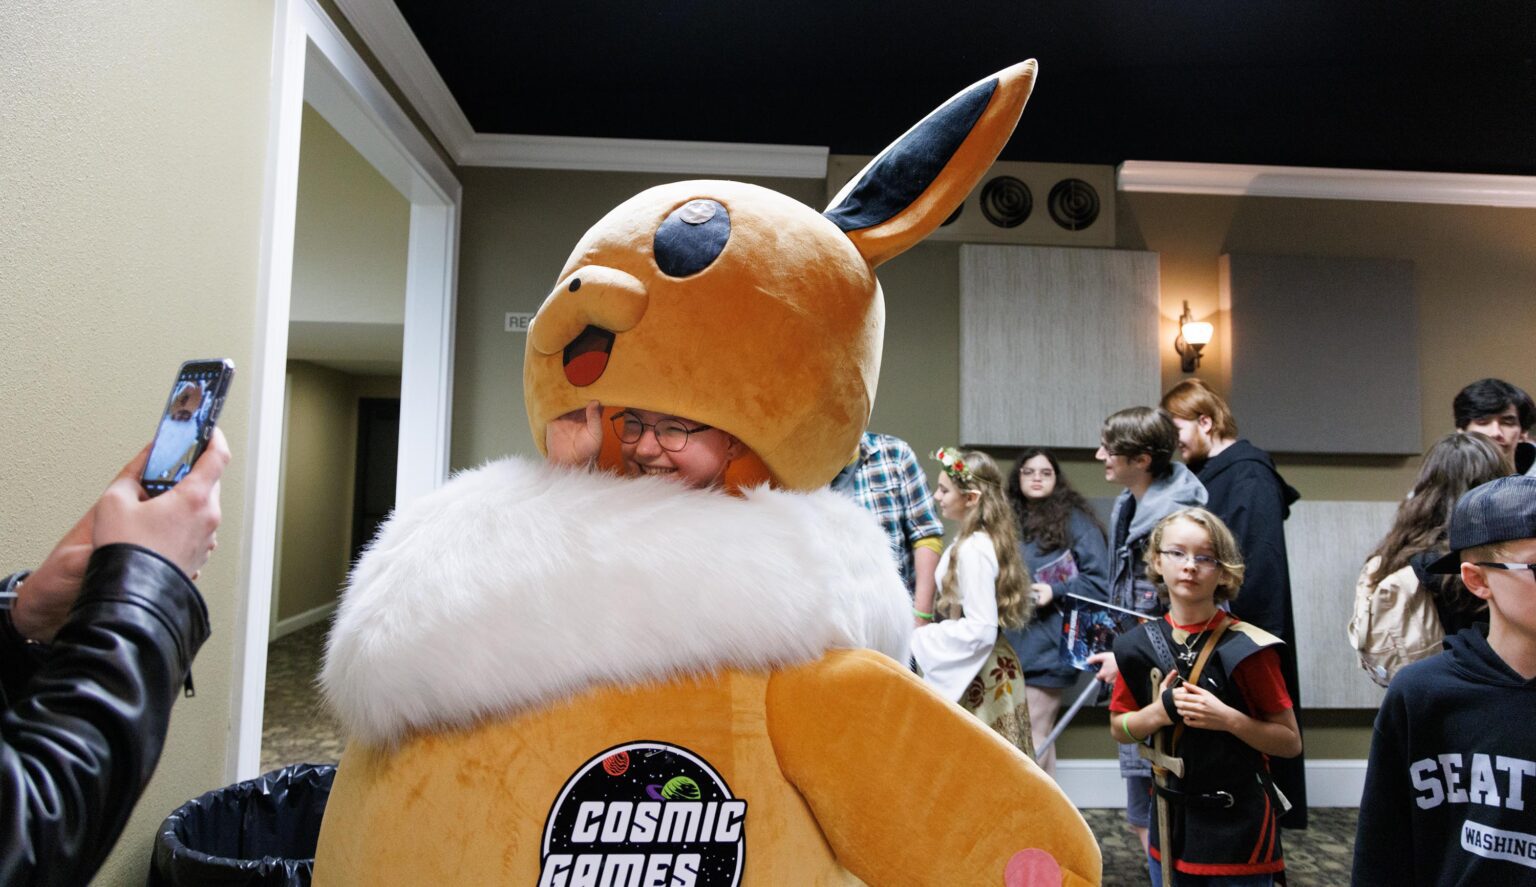 Jordan Kubichek gets her photo taken before wandering the convention as Pokemon character Eevee at the Bellingham Comicon held in the Ferndale Events Center on Oct. 15. The event was last held in 2019.